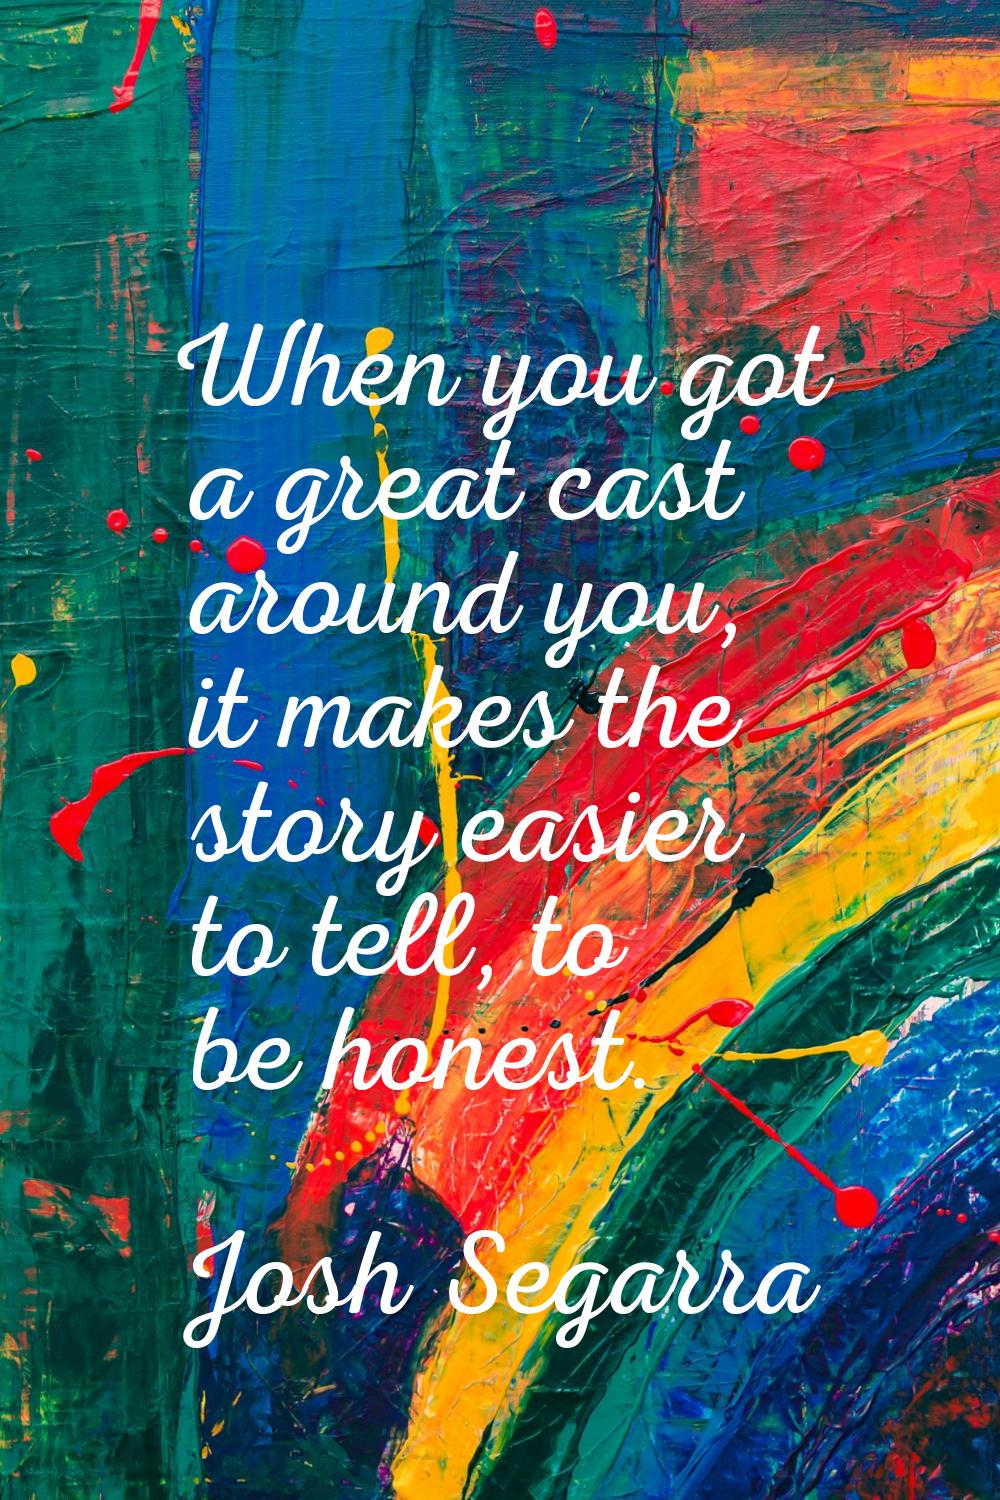 When you got a great cast around you, it makes the story easier to tell, to be honest.